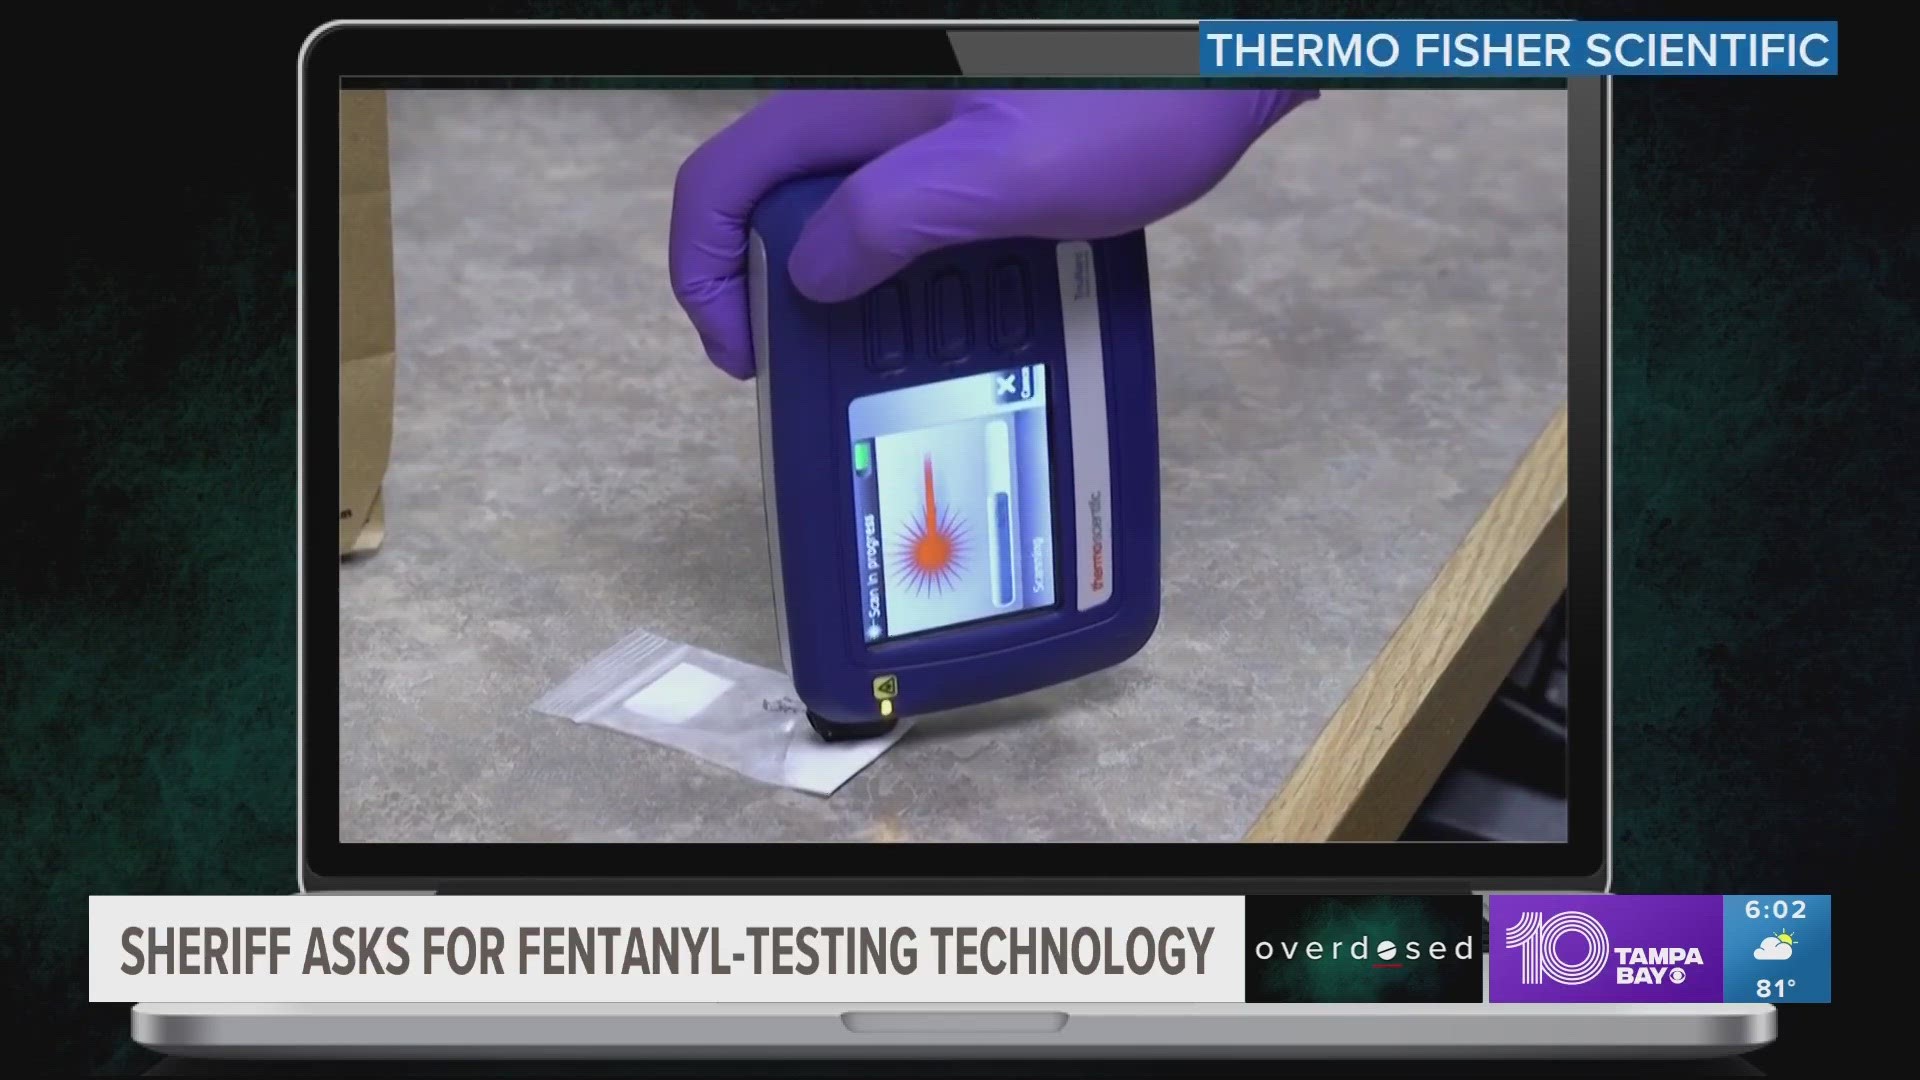 More than 4,000 Floridians died from a fentanyl overdose in 2021, according to the Florida Department of Law Enforcement's Medical Examiners Commission.